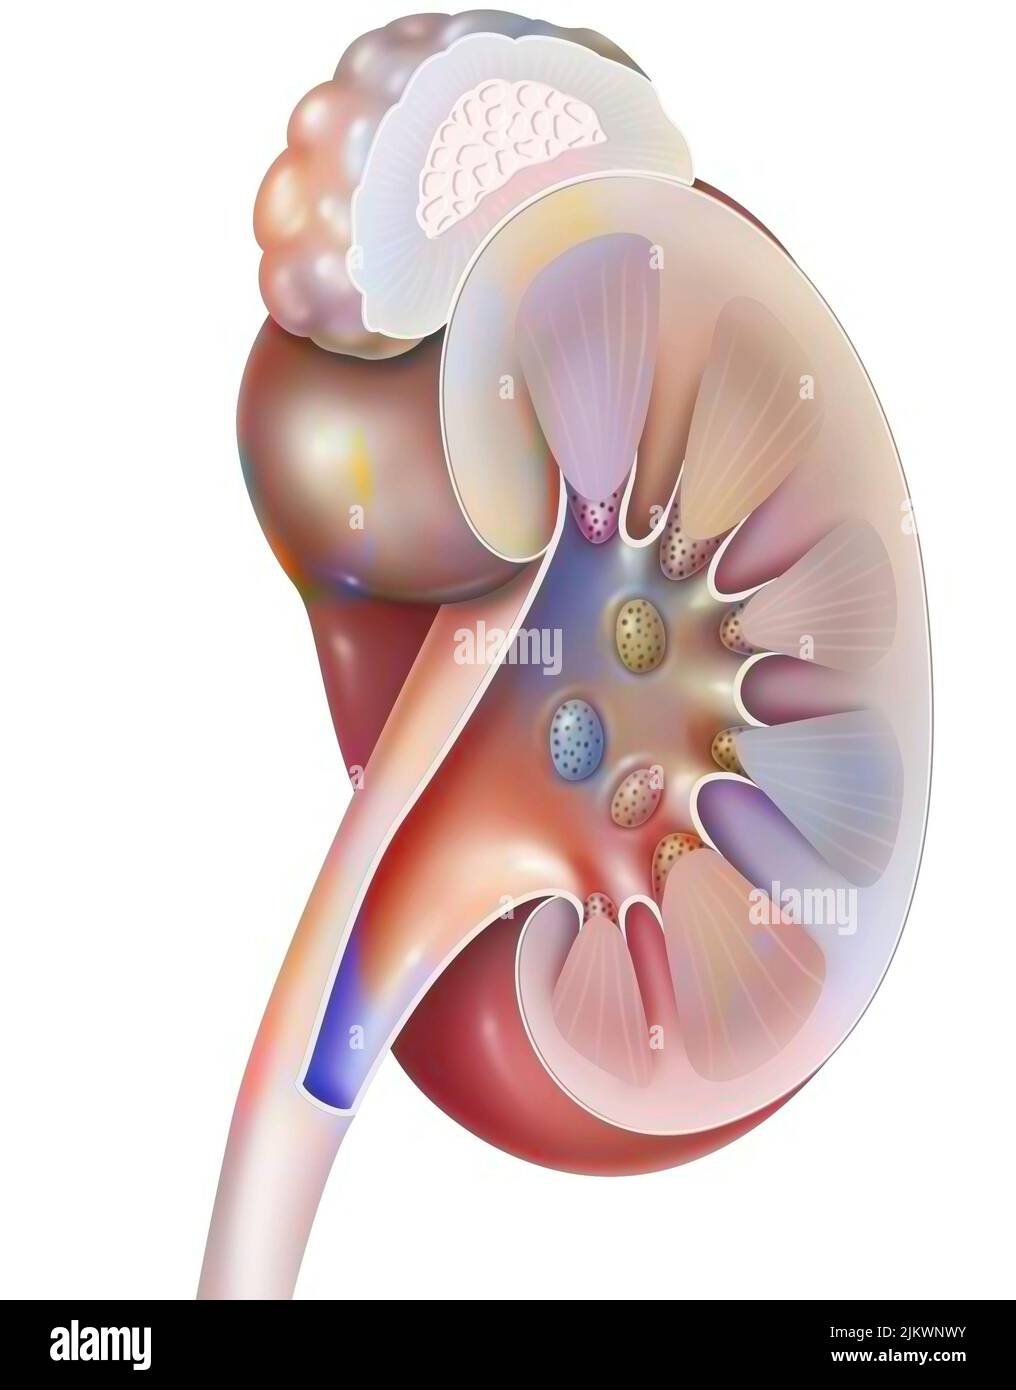 Structures of the kidney and left ureter in 3/4 views. Stock Photo